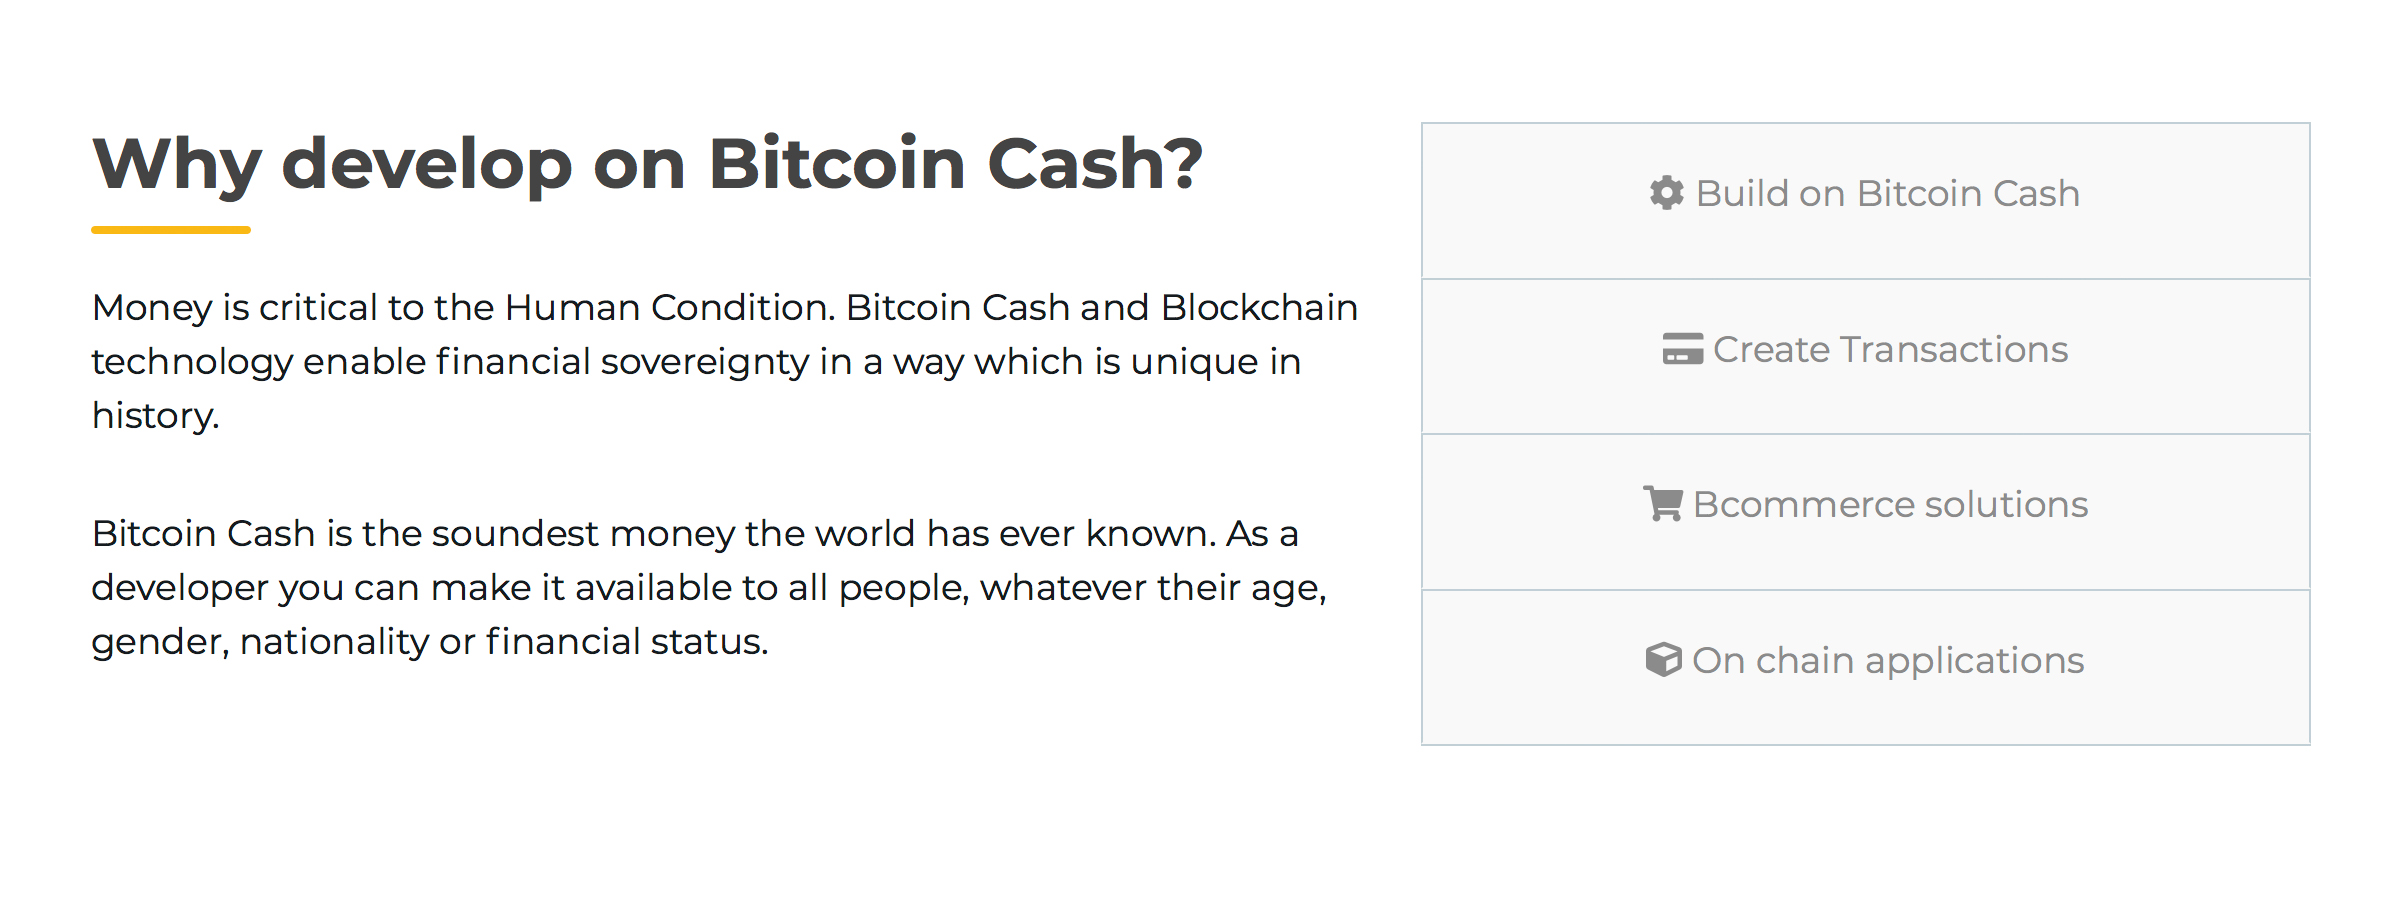 Want to Develop Bitcoin Cash Apps? Bitcoin.com Has You Covered